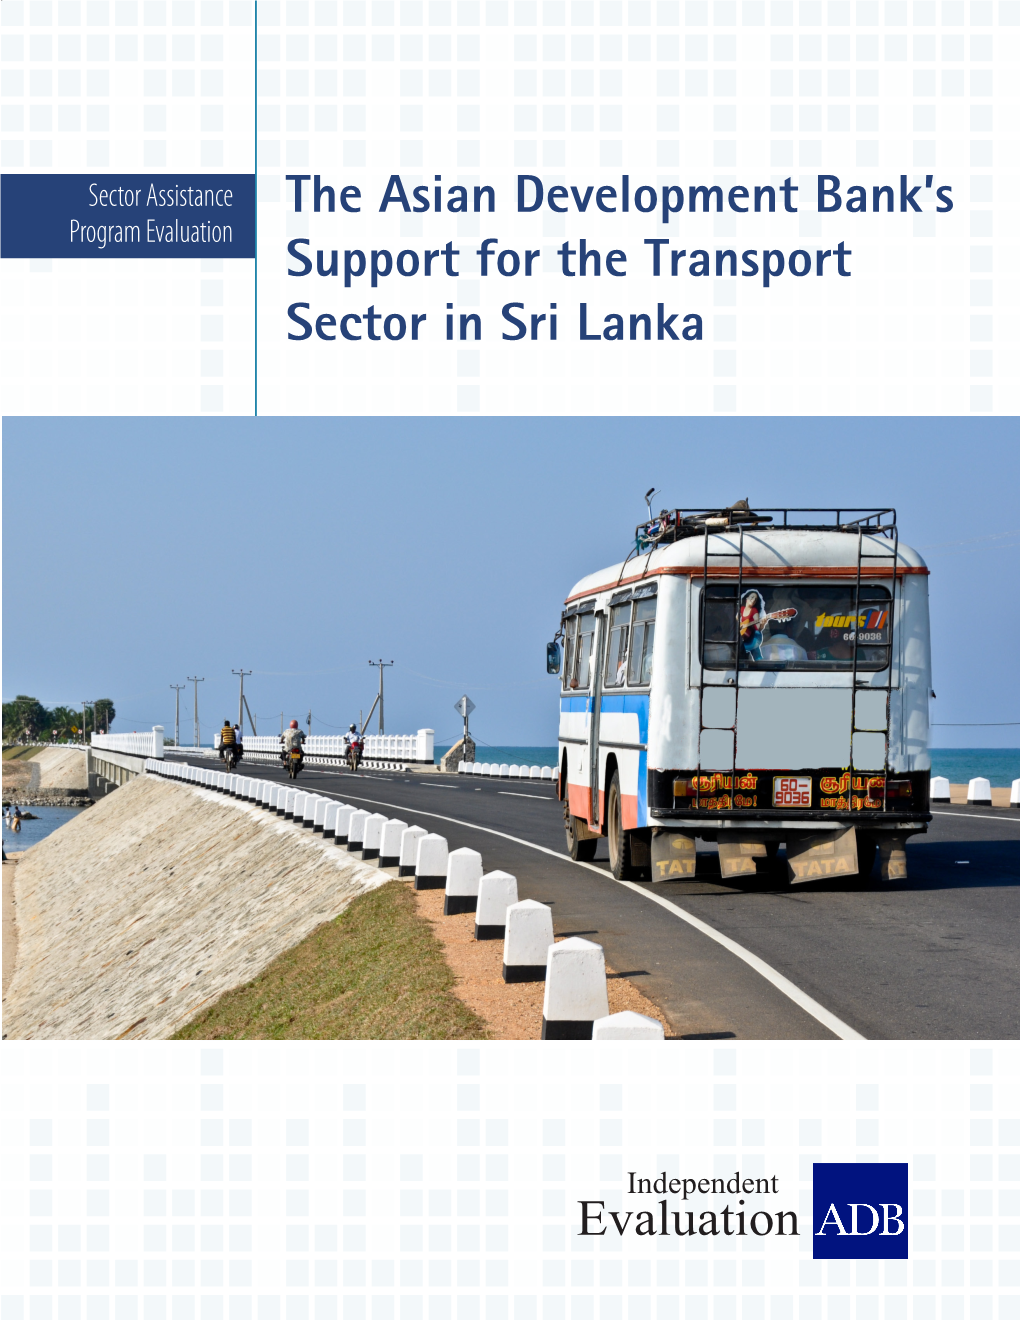 The Asian Development Bank's Support for the Transport Sector in Sri Lanka